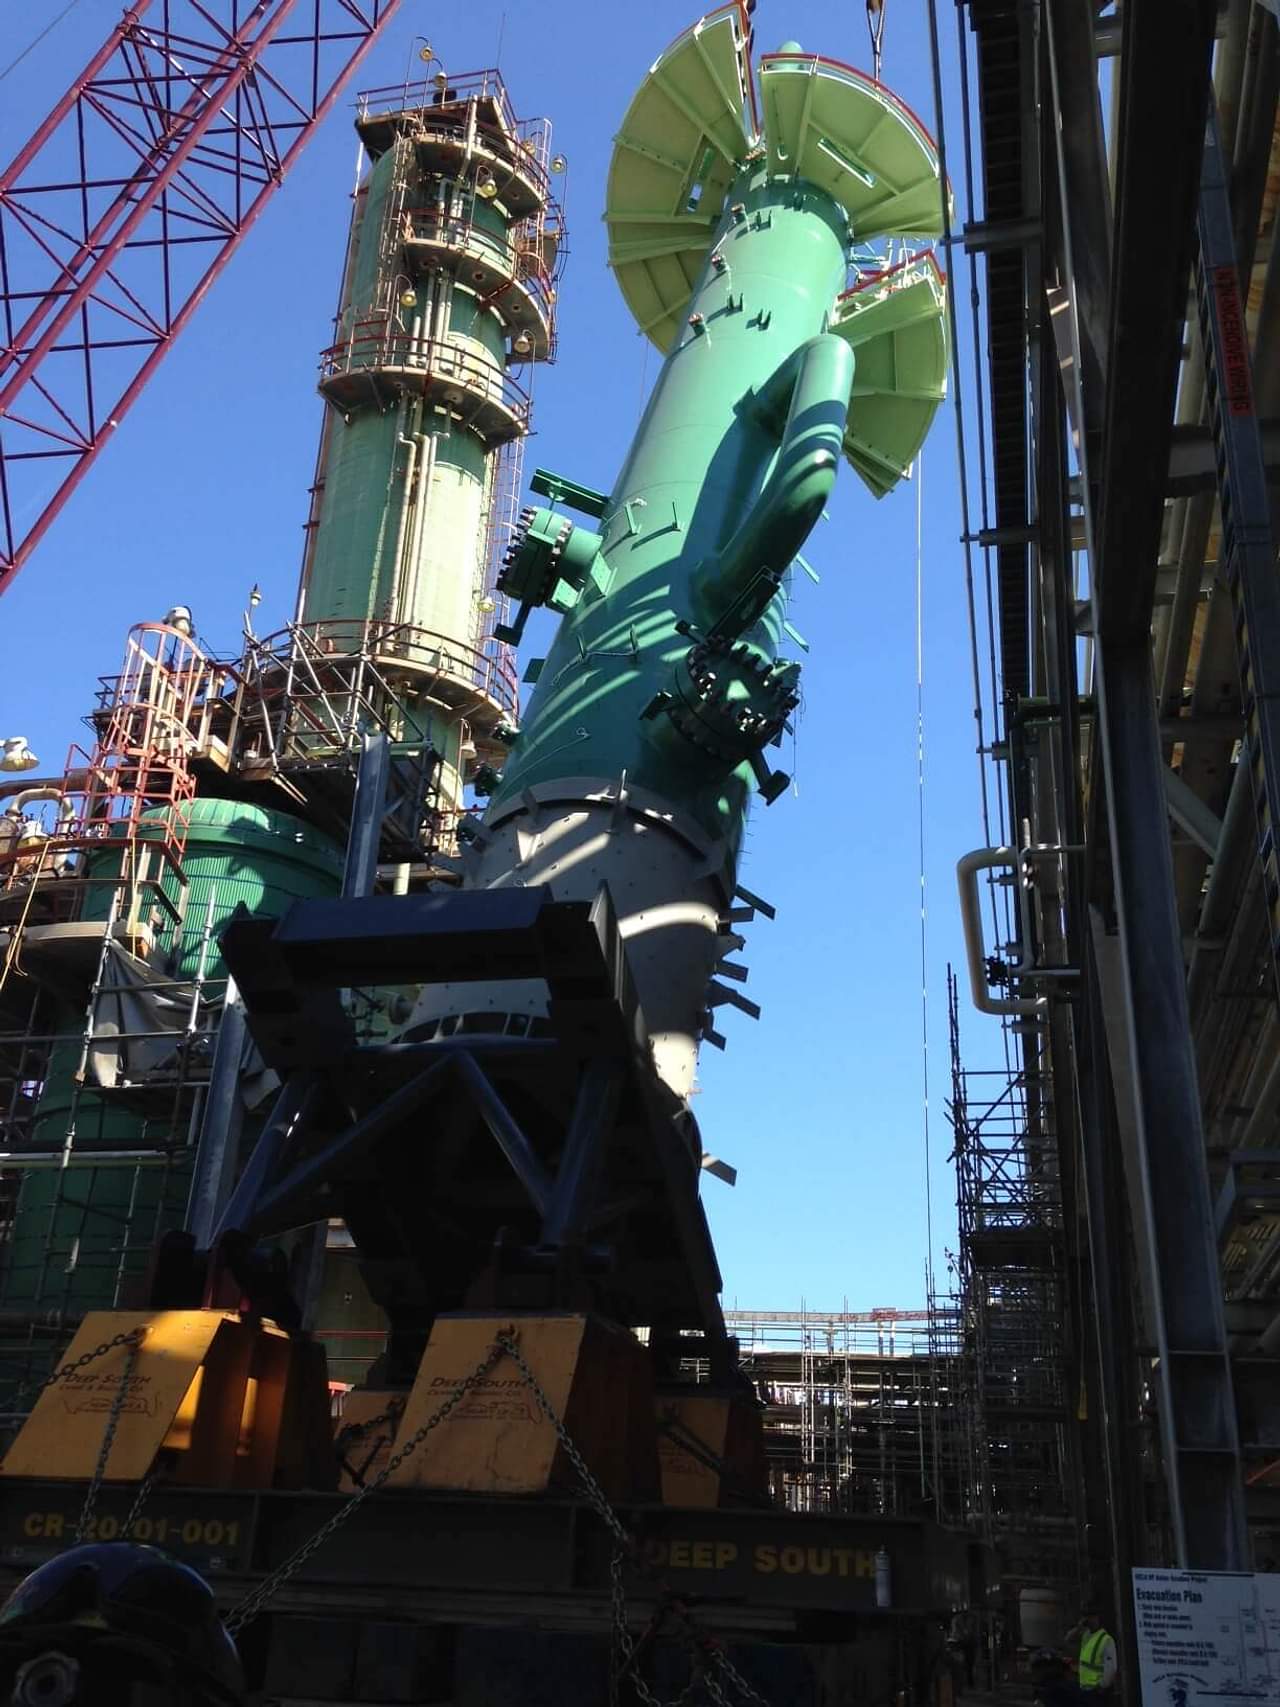 Deep South Crane & Rigging for turnkey projects